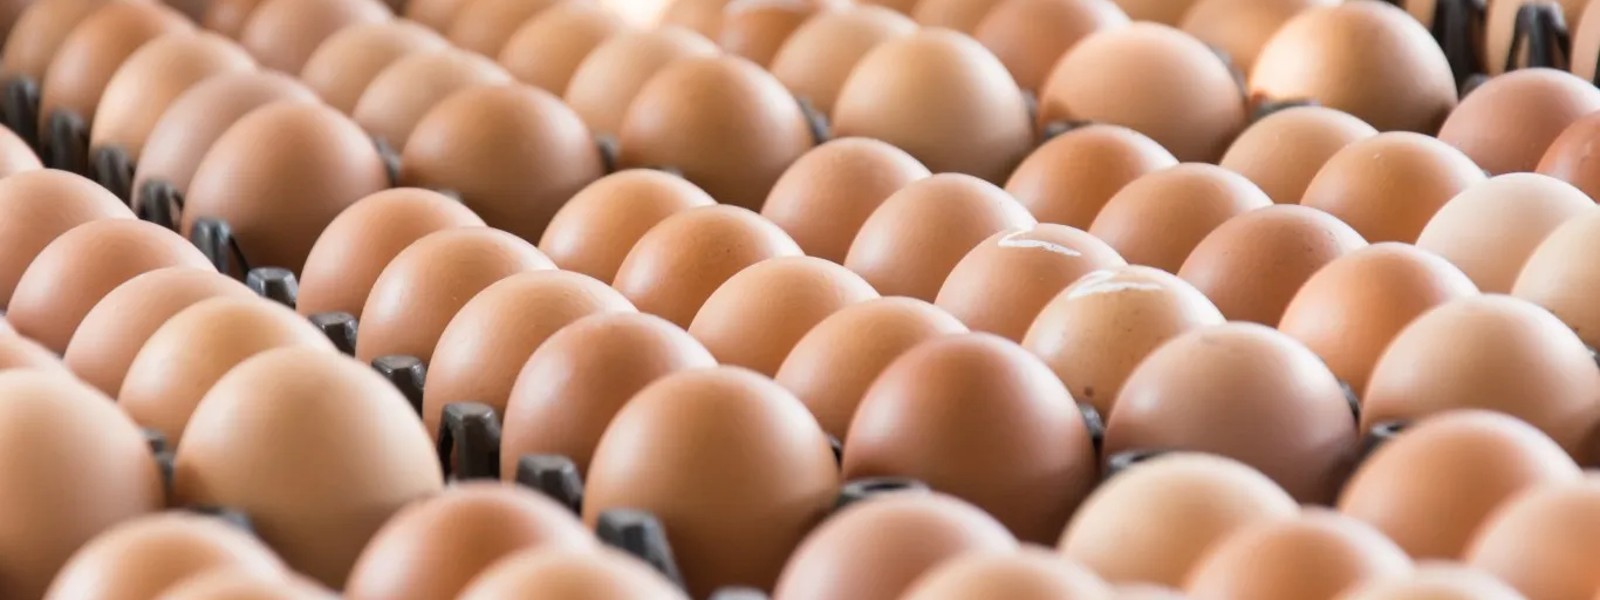 Farmers expect egg shortages; Minister fears for poultry industry